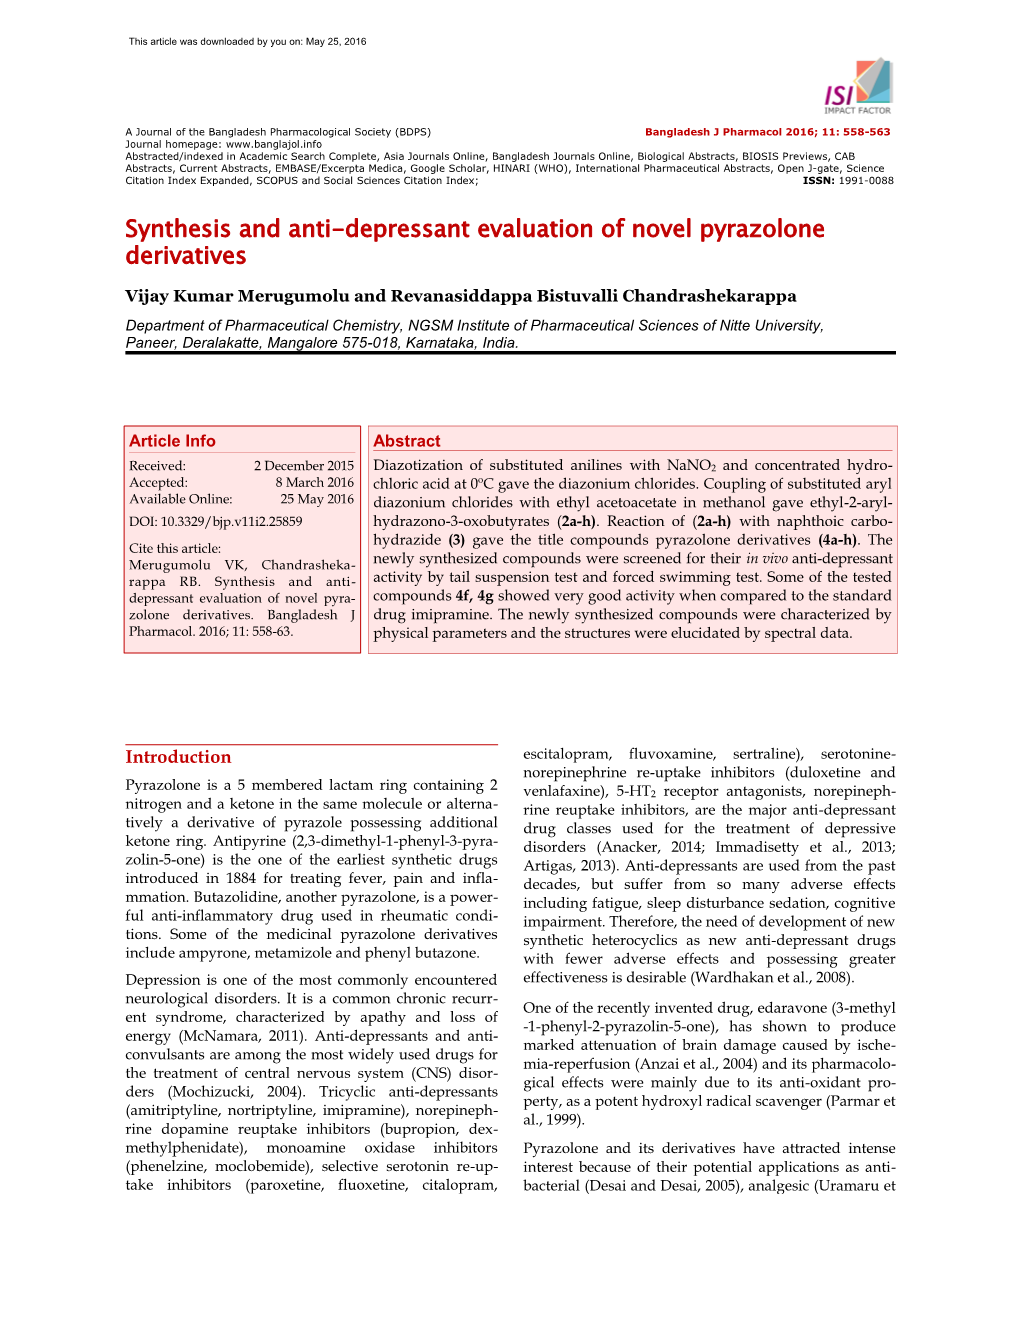 Synthesis and Anti-Depressant Evaluation of Novel Pyrazolone Derivatives